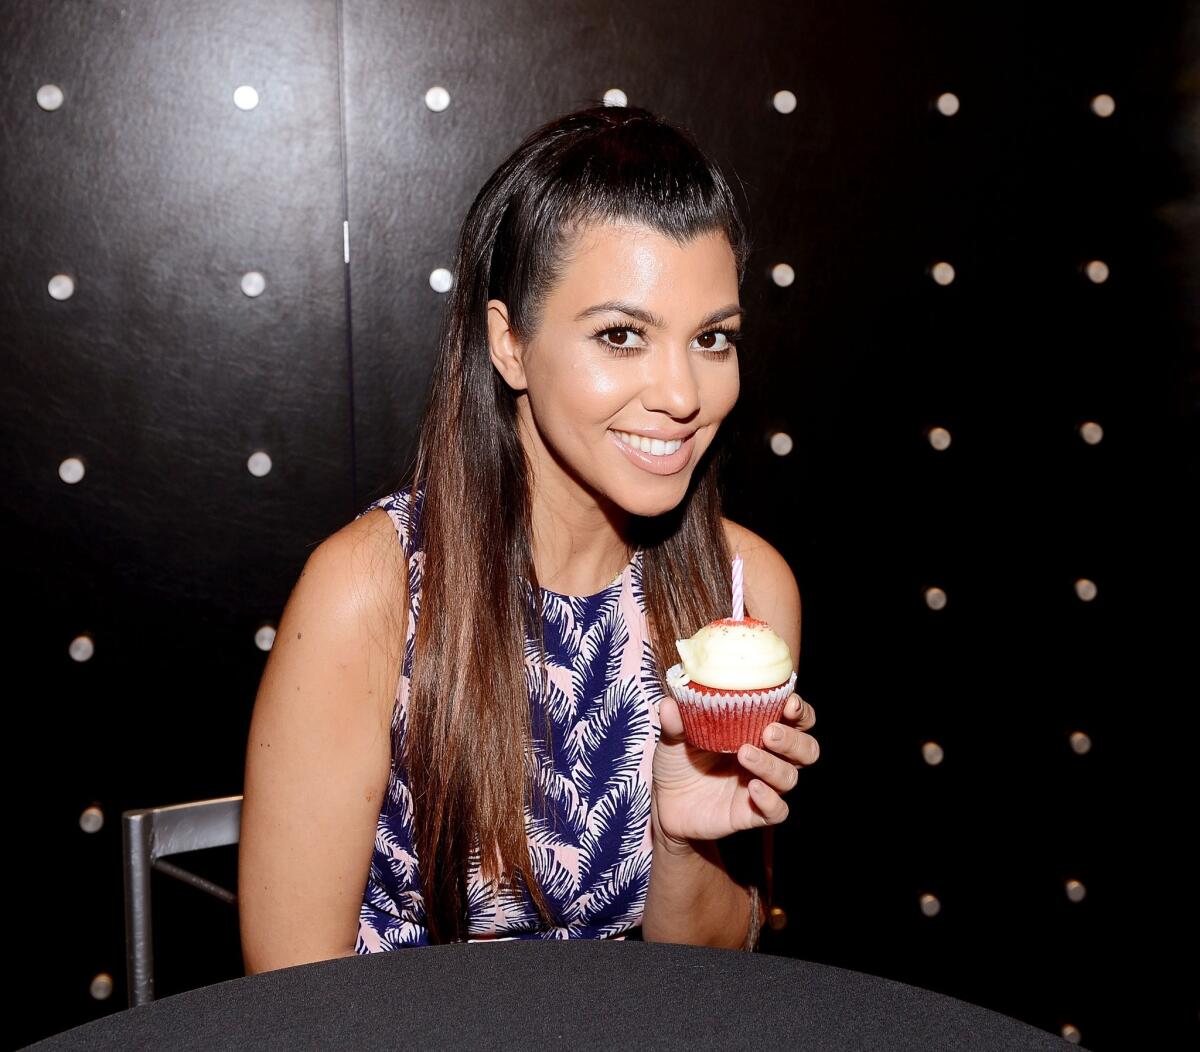 Kourtney Kardashian makes an appearance at the Mirage Hotel and Casino in Las Vegas on April 12.